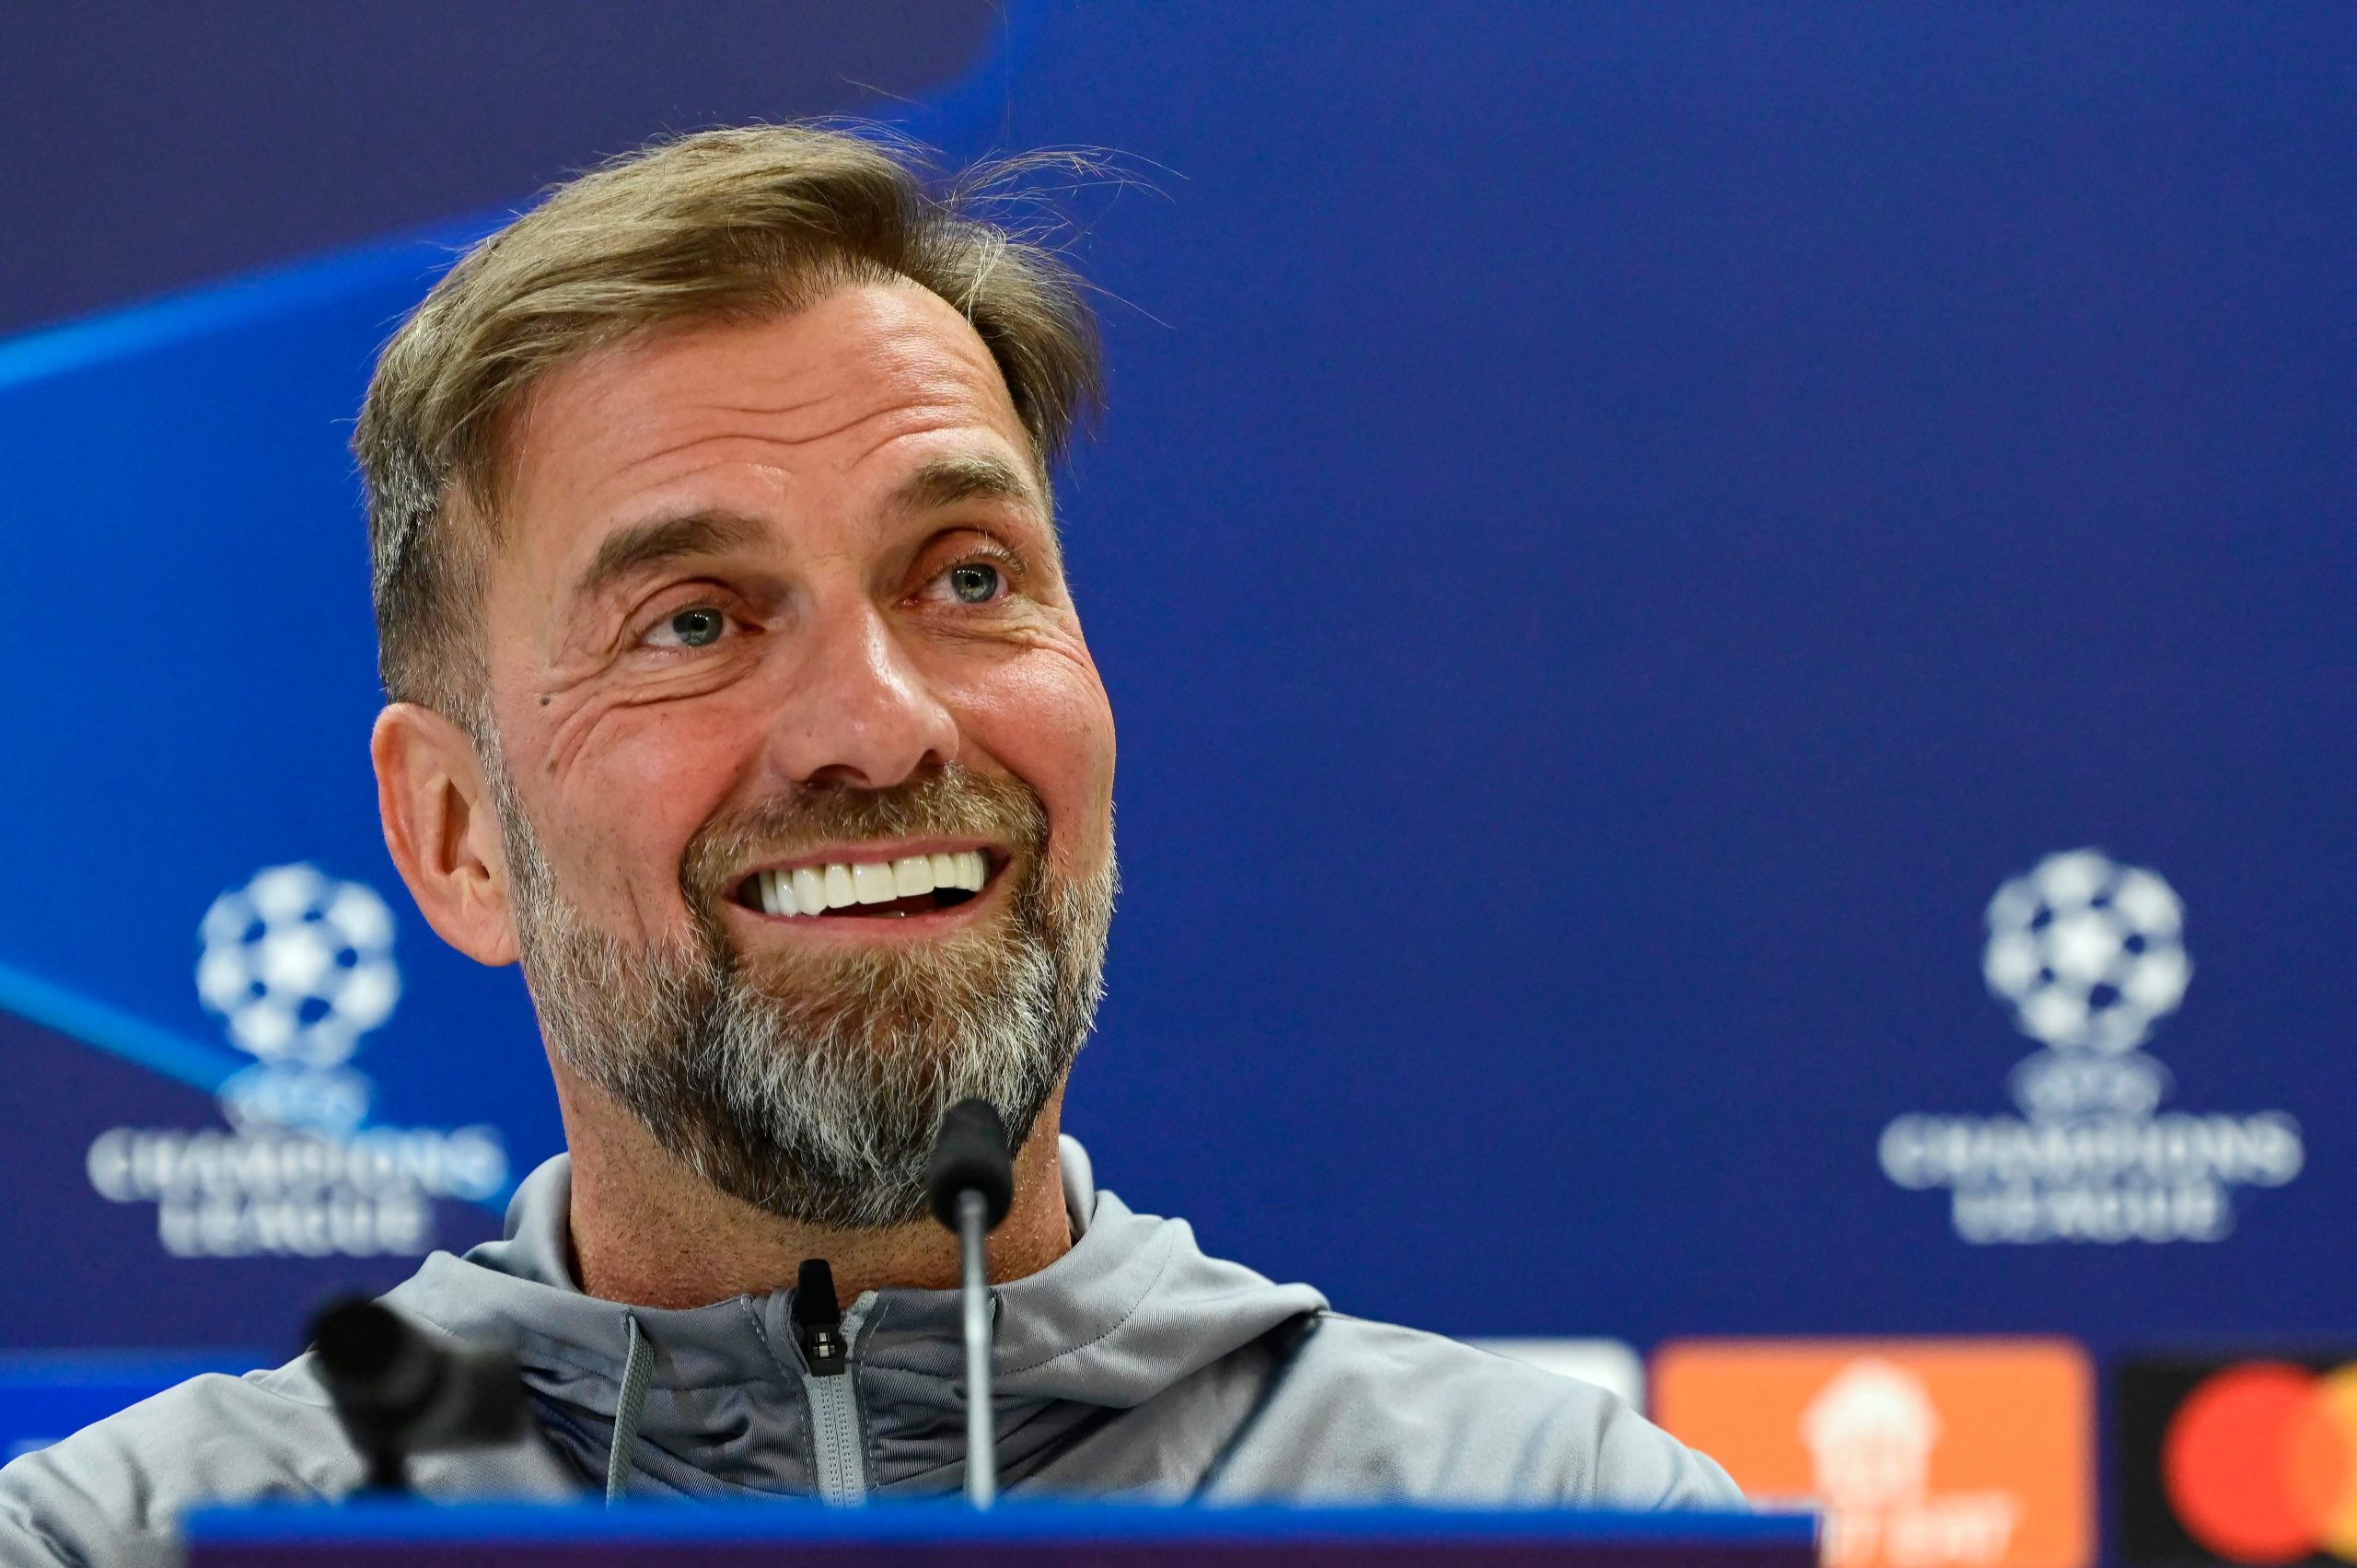 Is Jurgen Klopp the likely manager to get sacked next season?